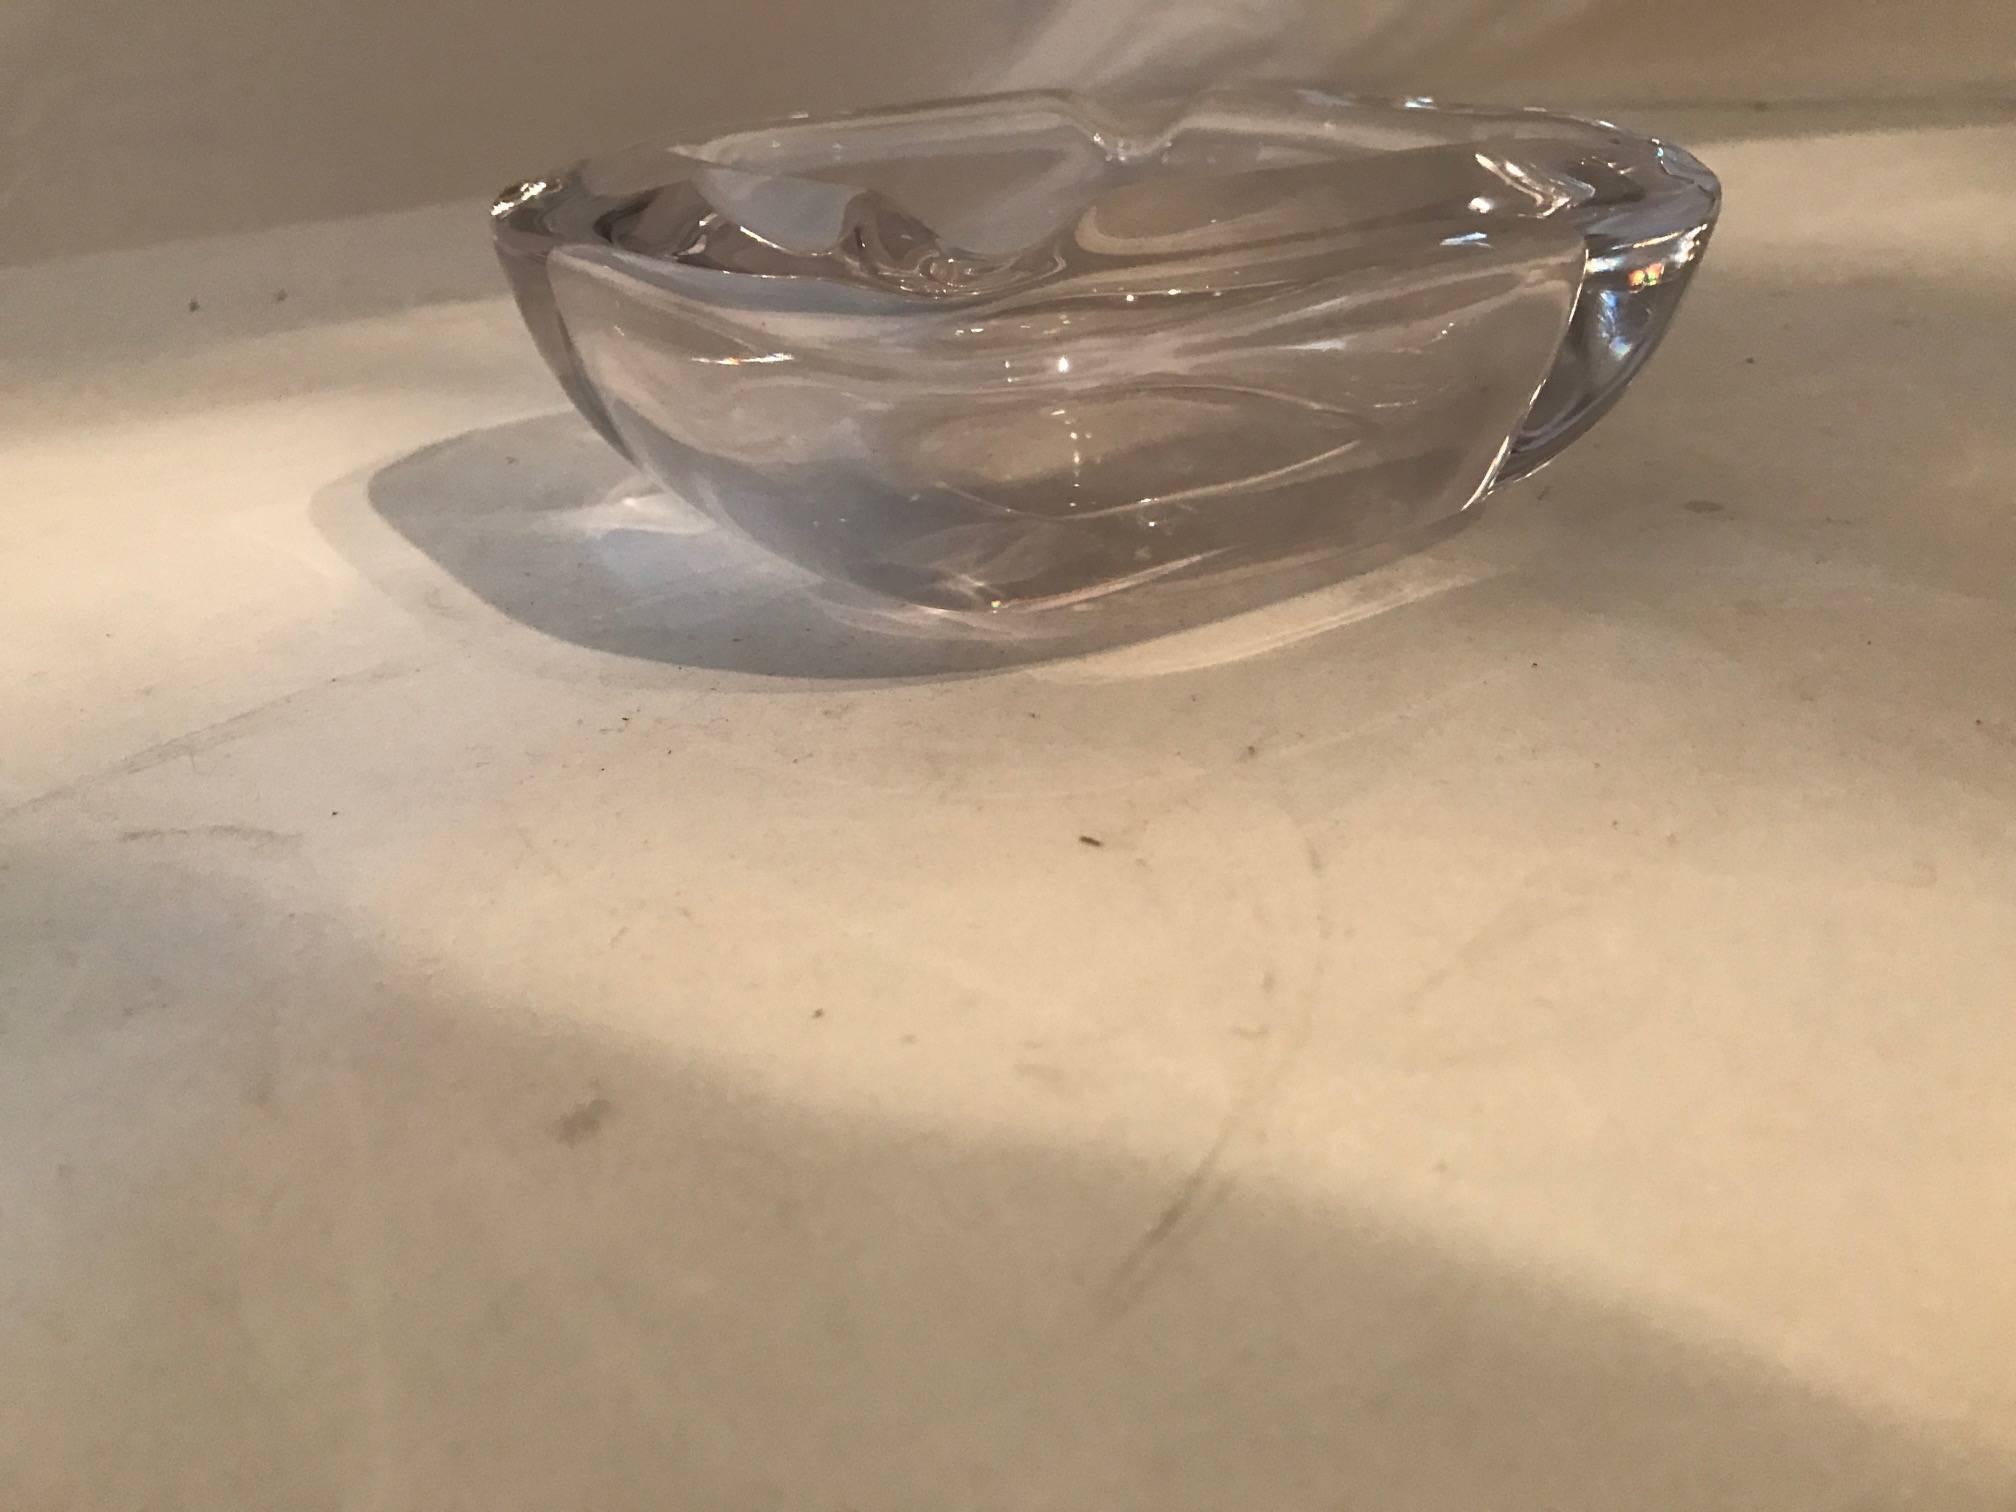 Pinkish thick glass ashtray-bowl, circa 1950s French with a company stamp on the bottom.